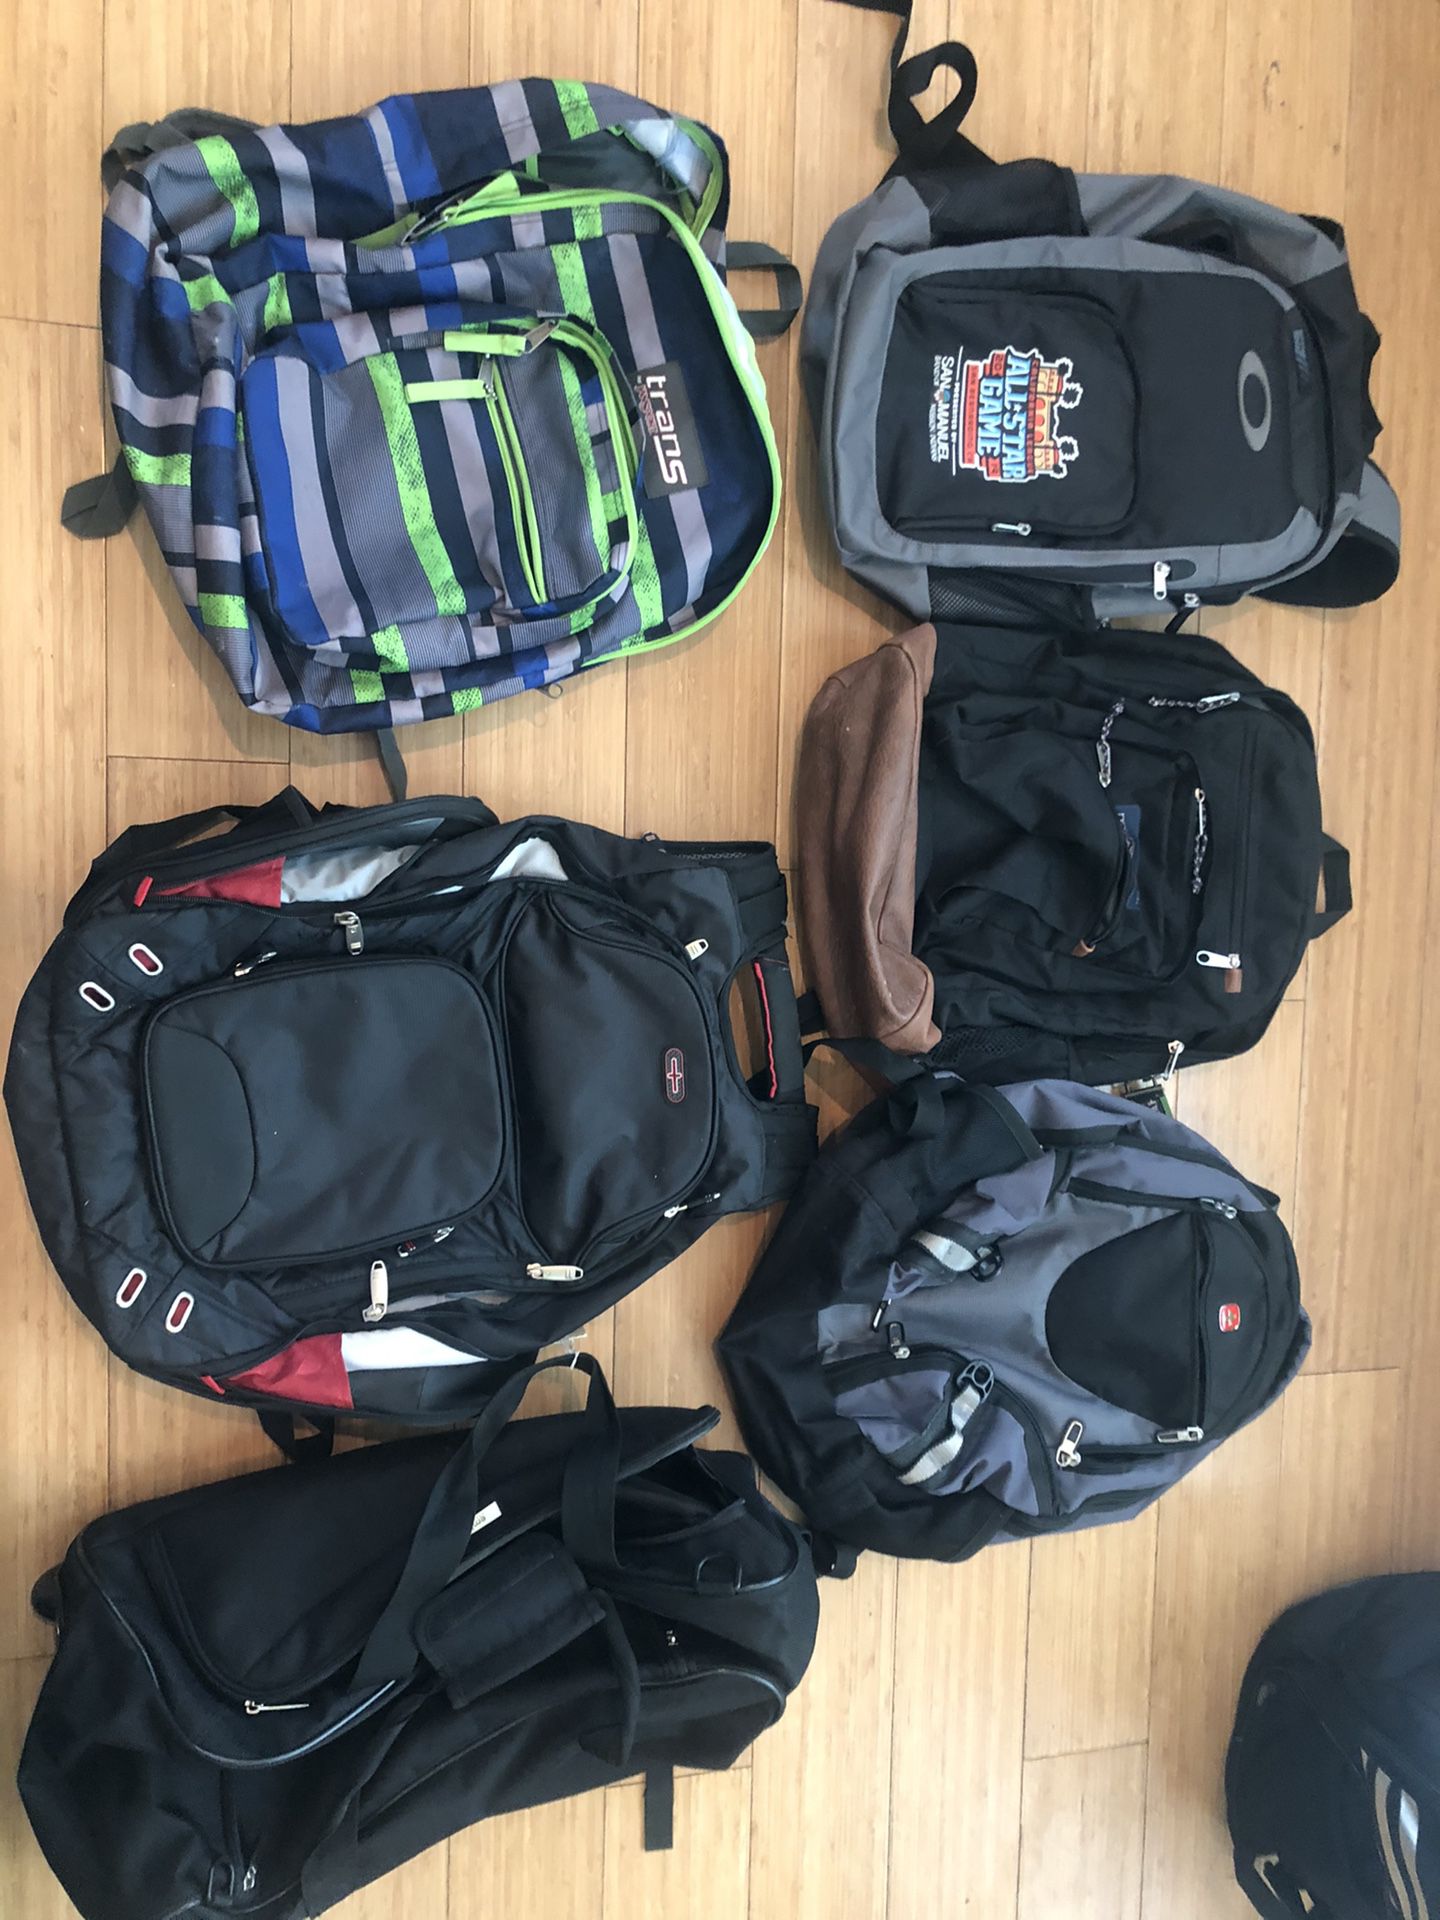 5 great condition backpacks w laptop pouches (Oakley, Jansport and Swiss) plus rolling bag